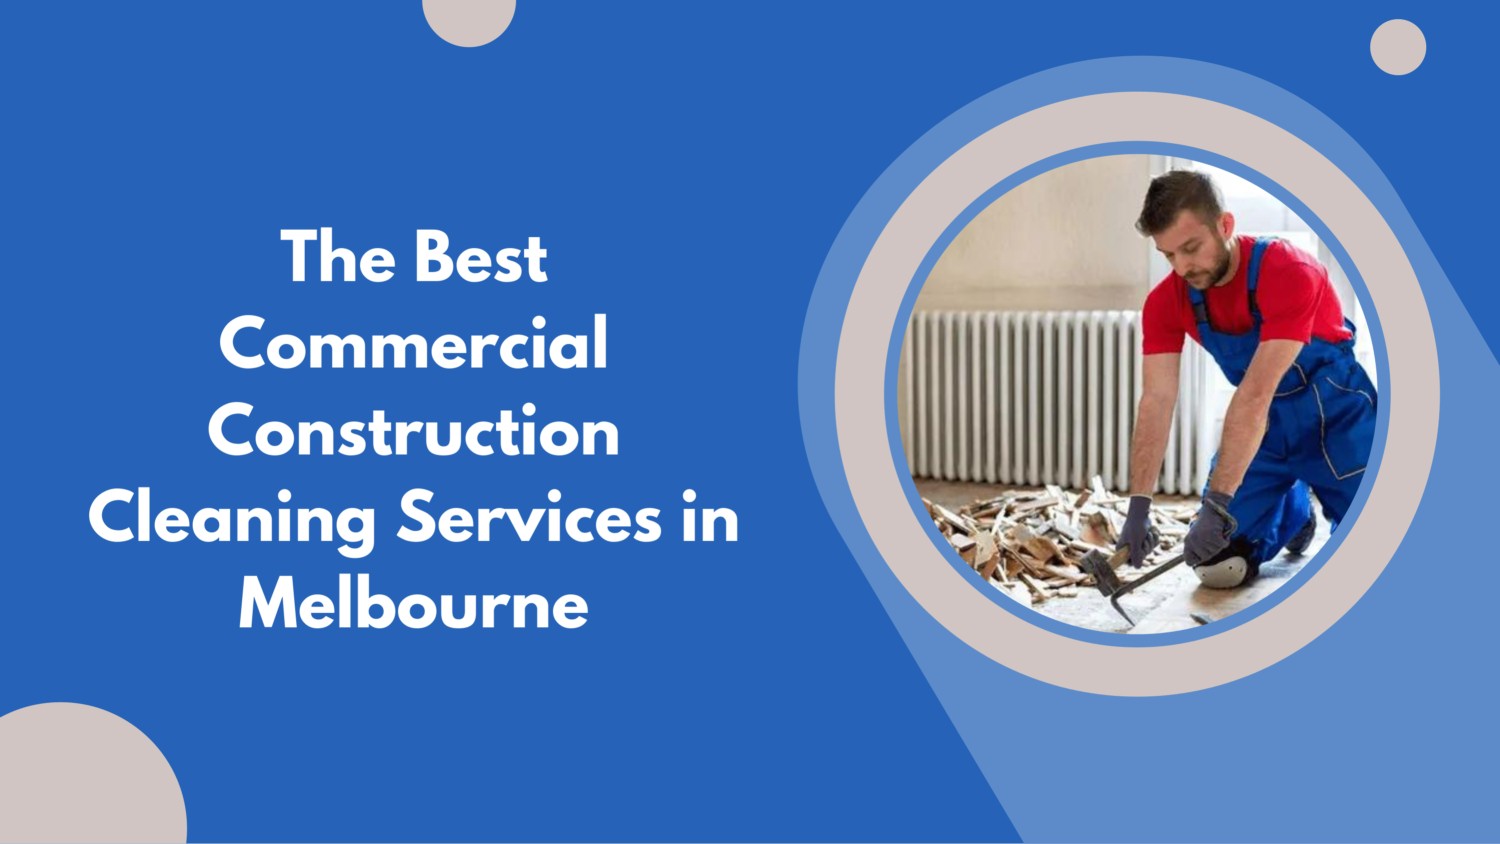 The Best Commercial Construction Cleaning Services in Melbourne